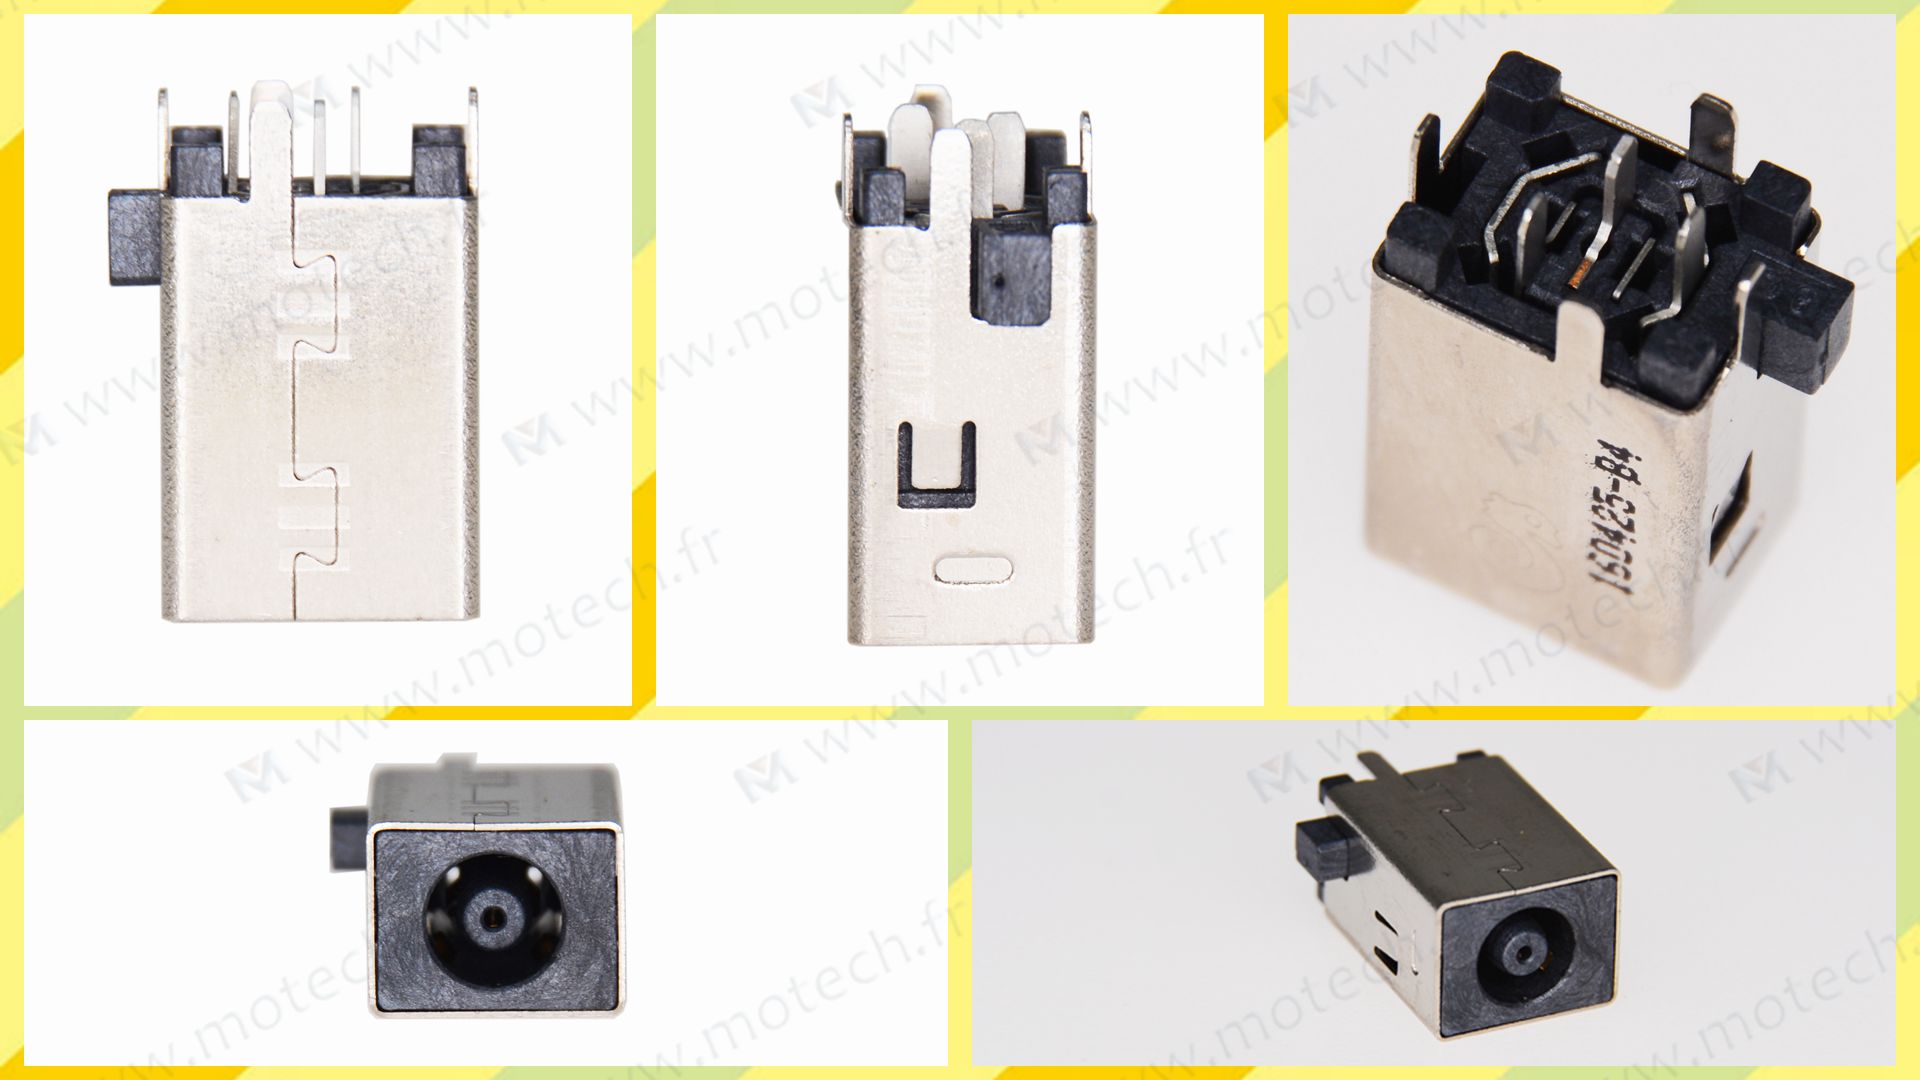 Dell 3000 AIO charging connector, Dell 3000 AIO DC Power Jack, Dell 3000 AIO Power Jack, Dell 3000 AIO plug, Dell 3000 AIO Jack socket, Dell 3000 AIO connecteur de charge, 